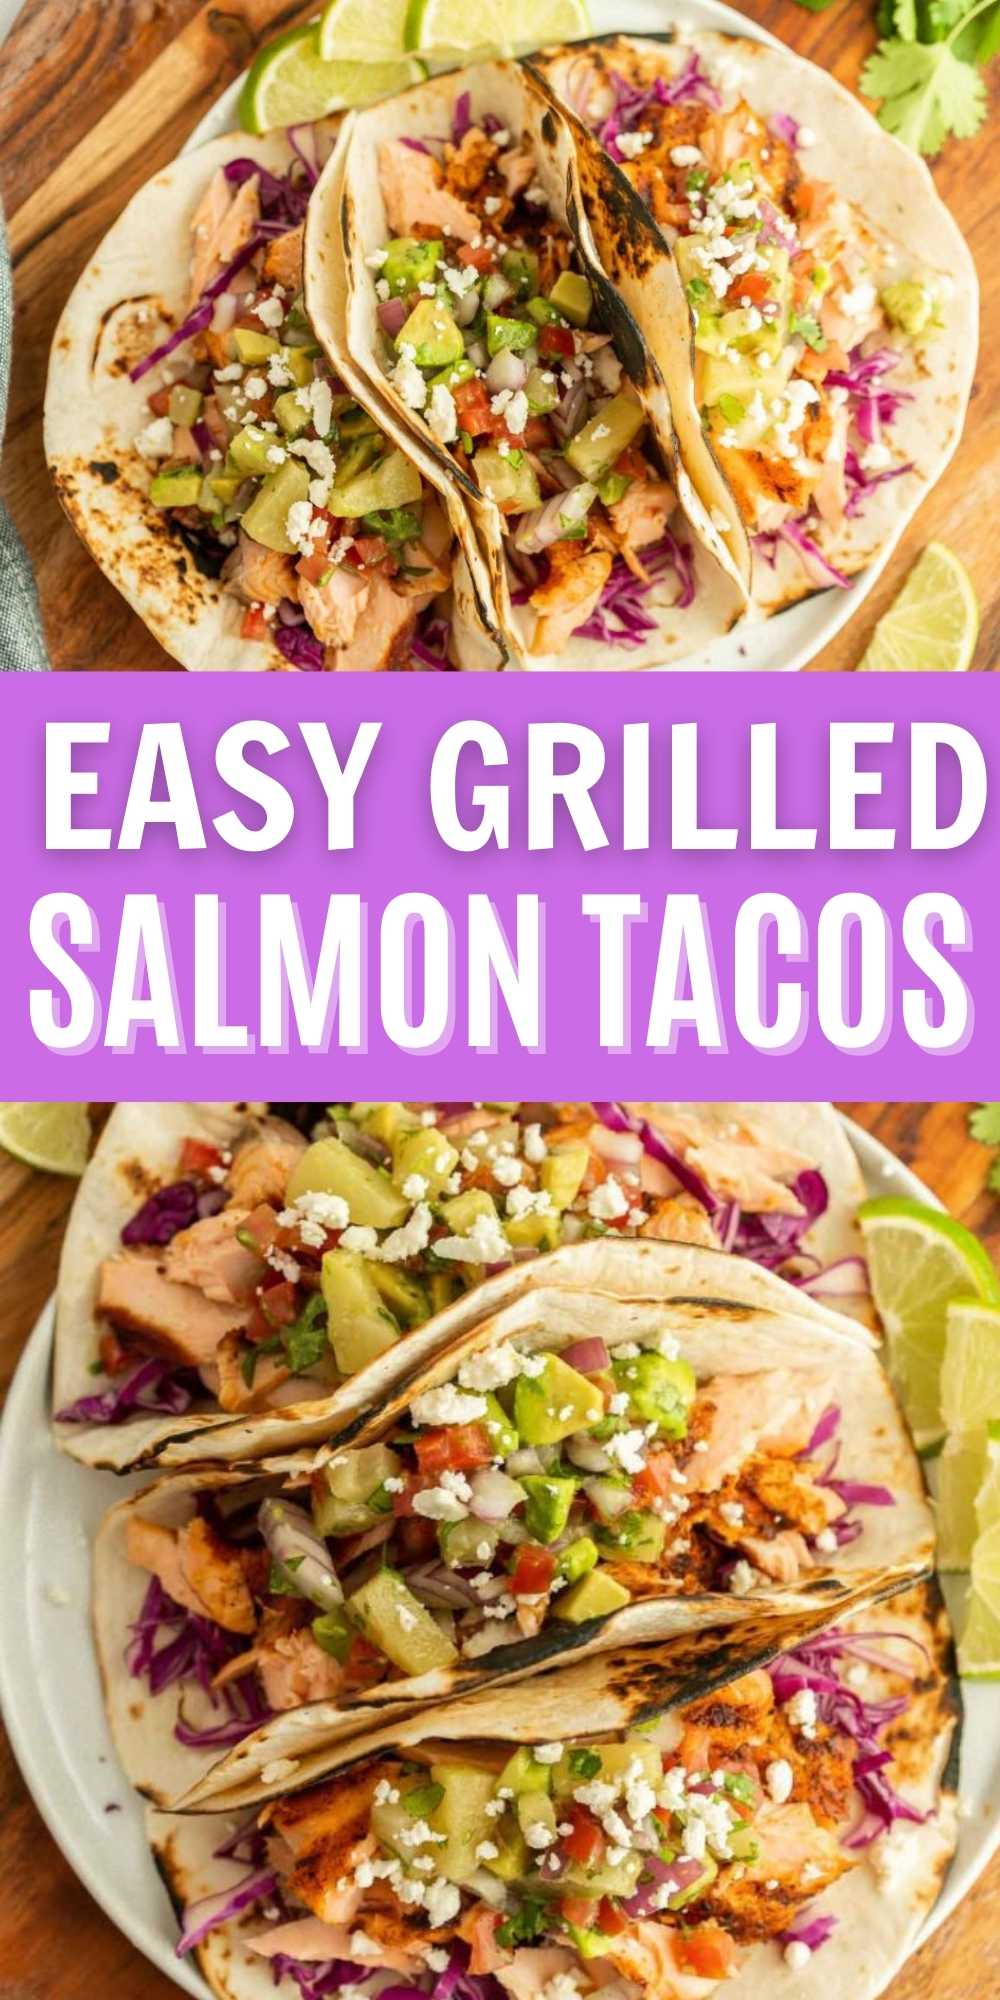 Grilled Salmon Tacos - Ready in 15 minutes